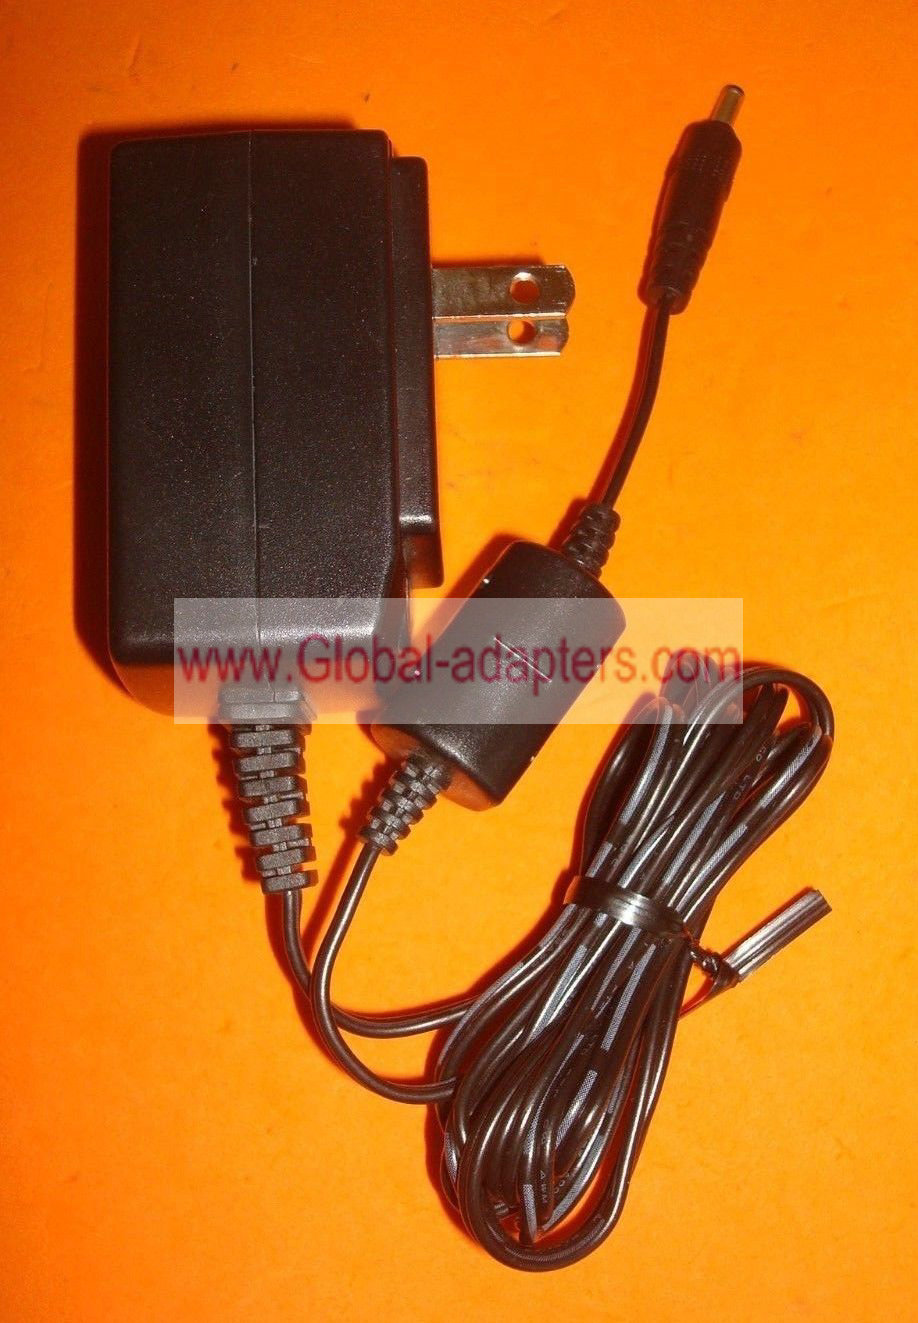 New HOIOTO ADS-5N-06 05005G 5V 1A ac adapter wall charger